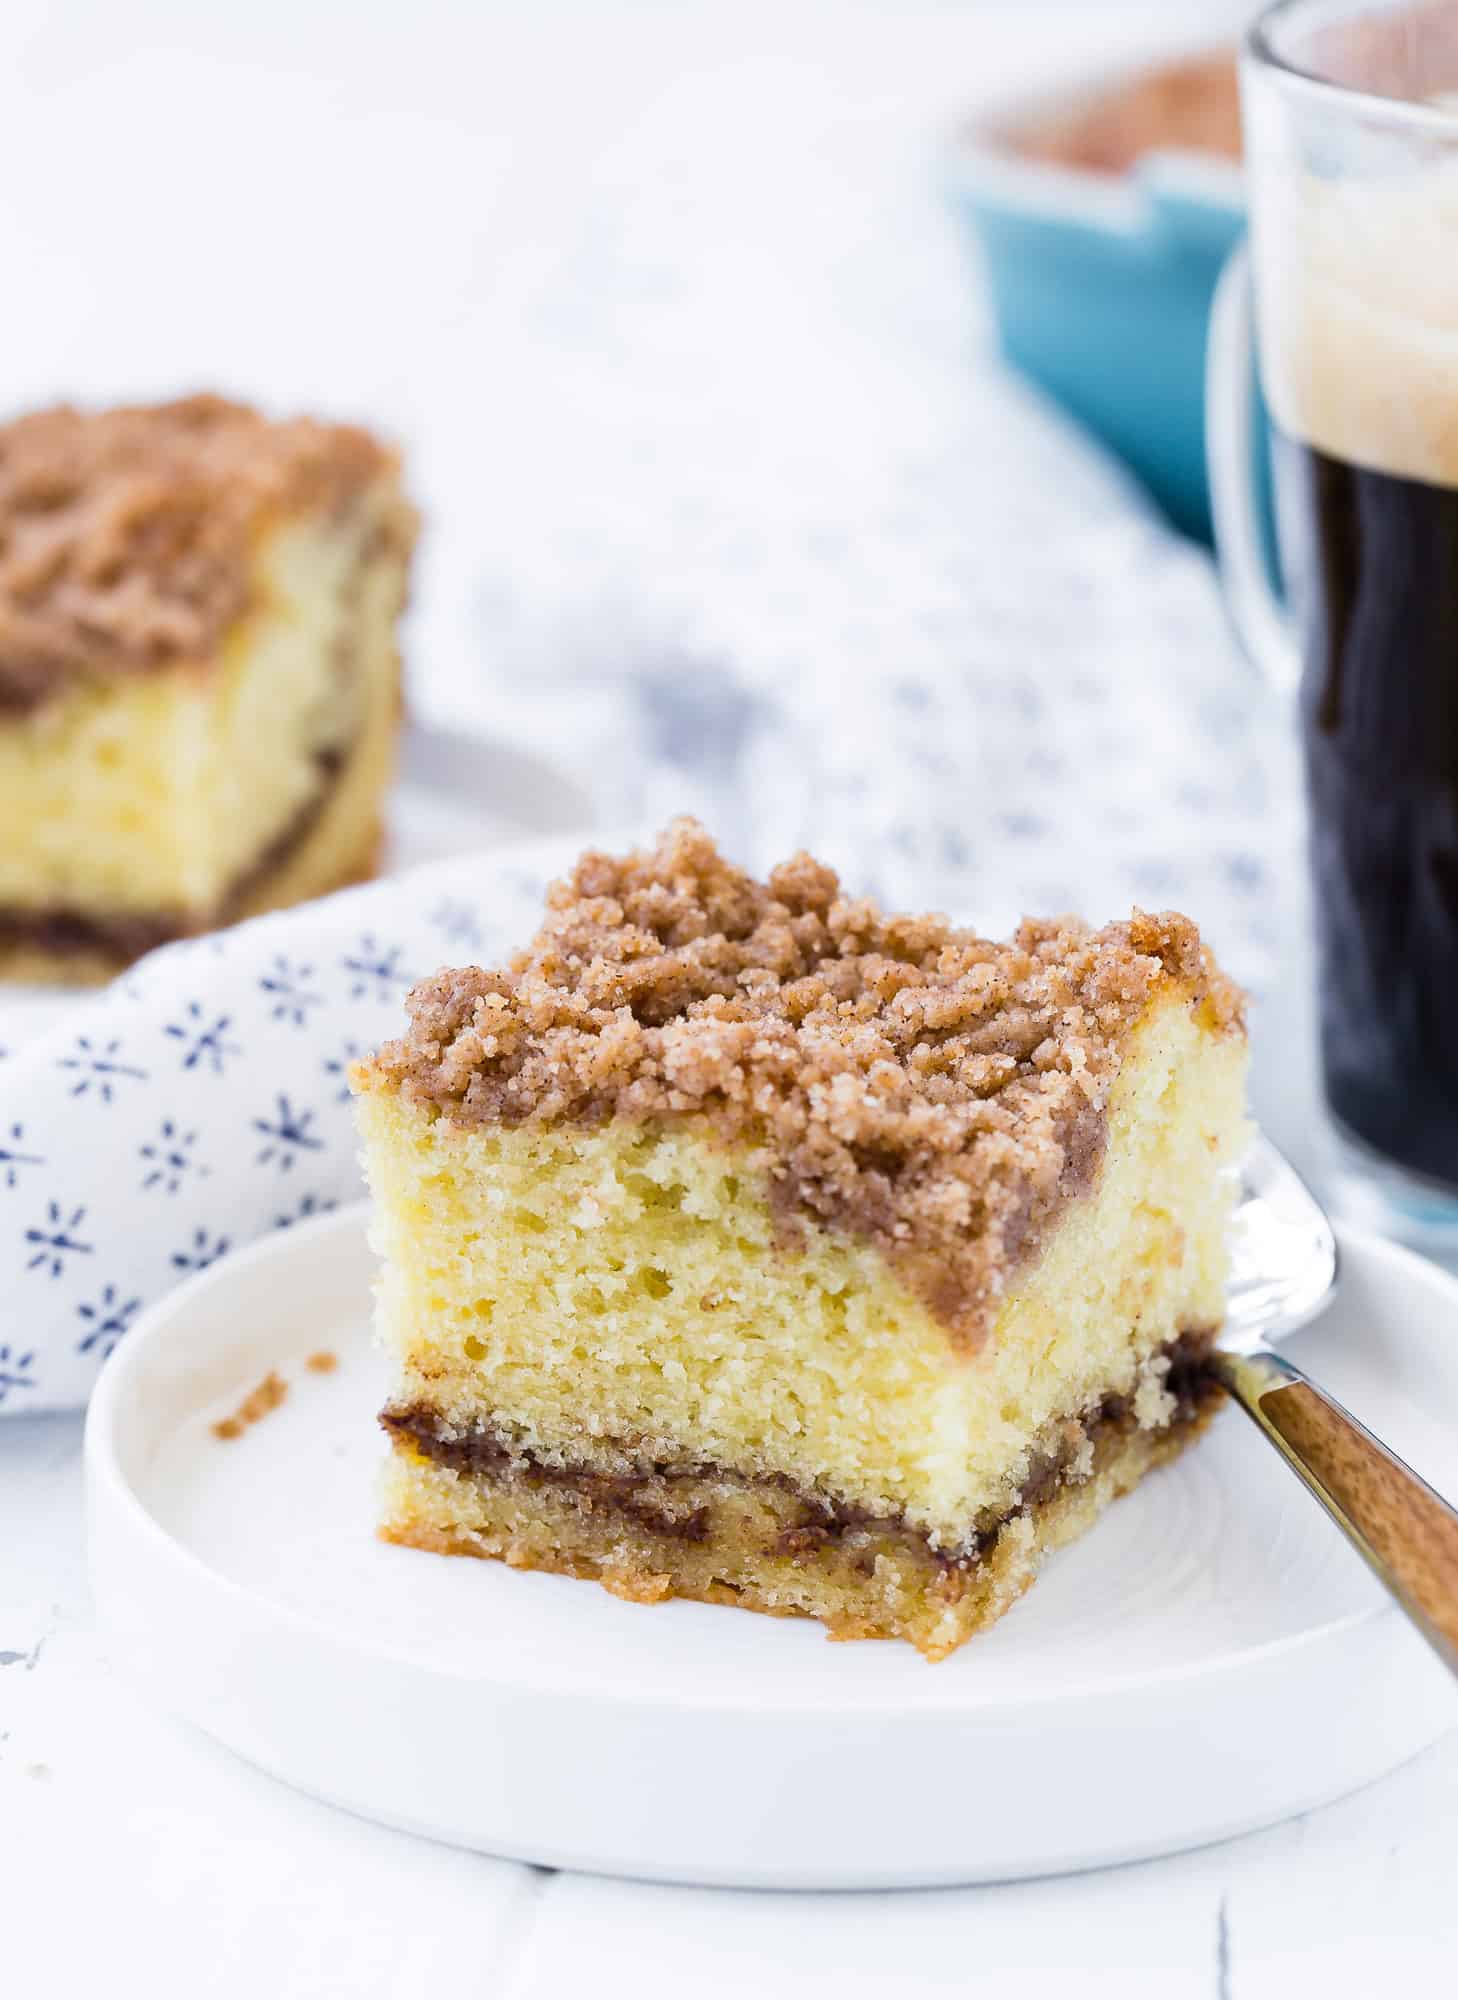 Square piece of cake with cinnamon layer.